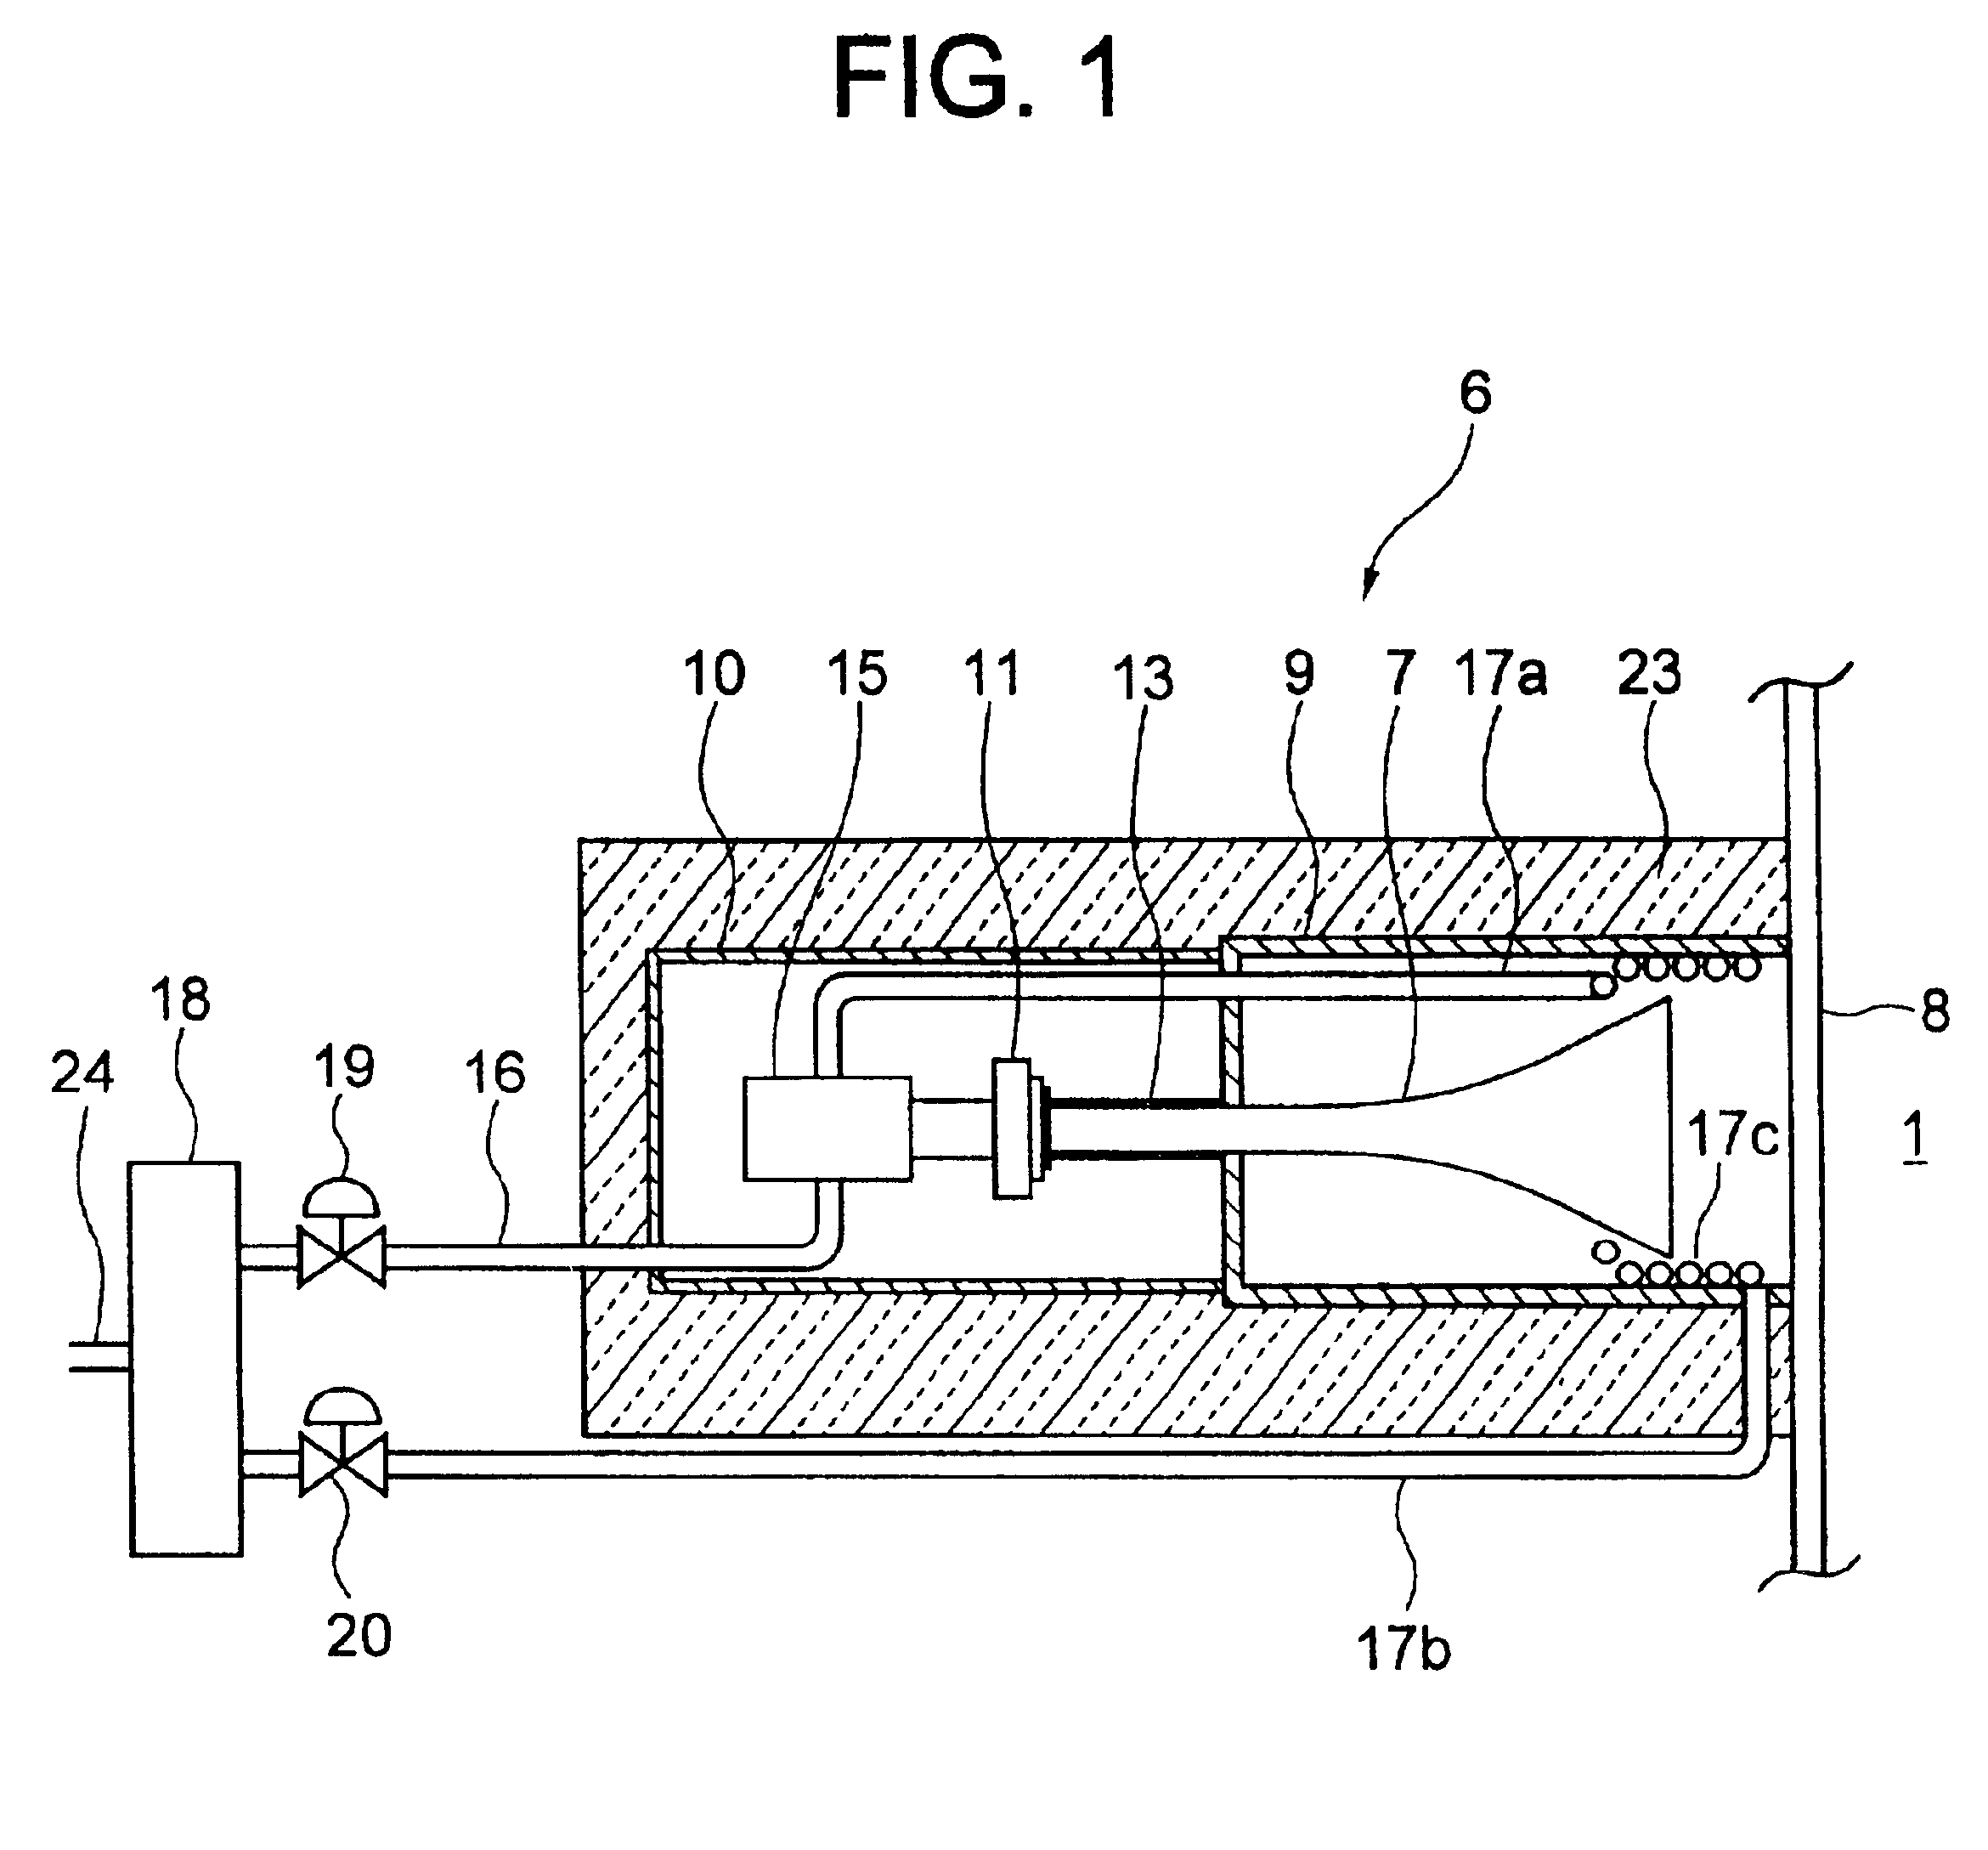 Acoustic soot blower, and method for operating the same